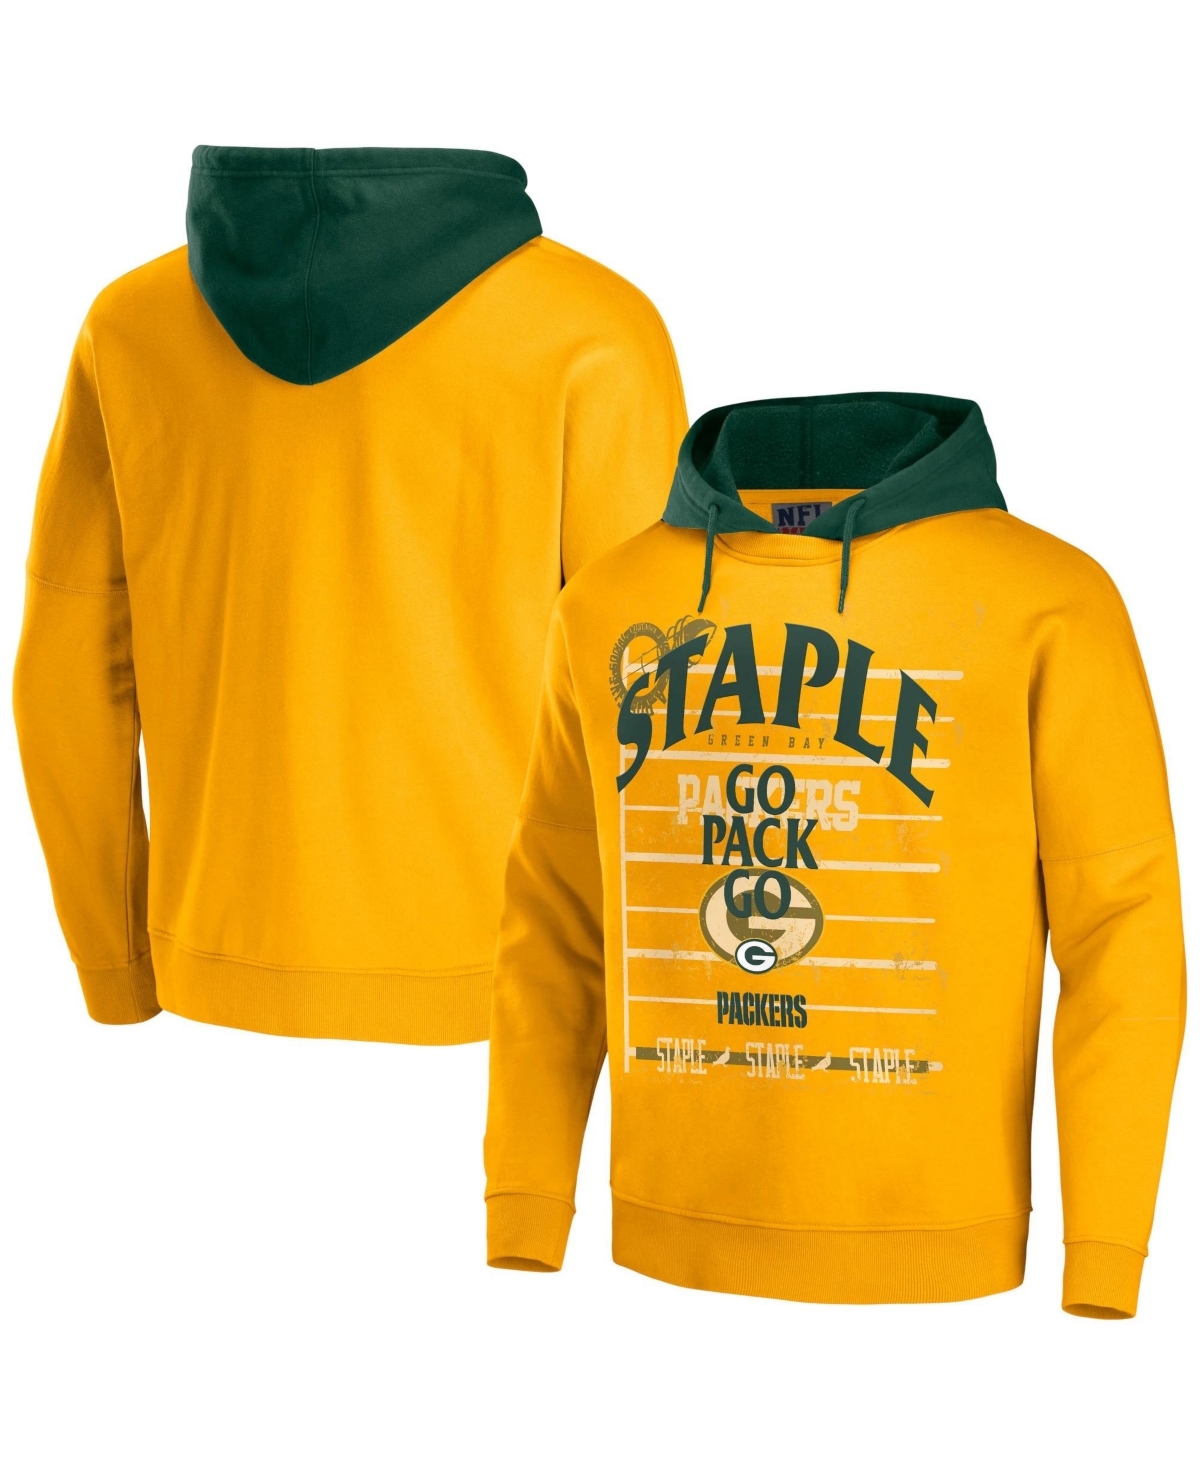 Men's Nfl X Staple Yellow Green Bay Packers Oversized Gridiron Vintage-Like Wash Pullover Hoodie - Yellow